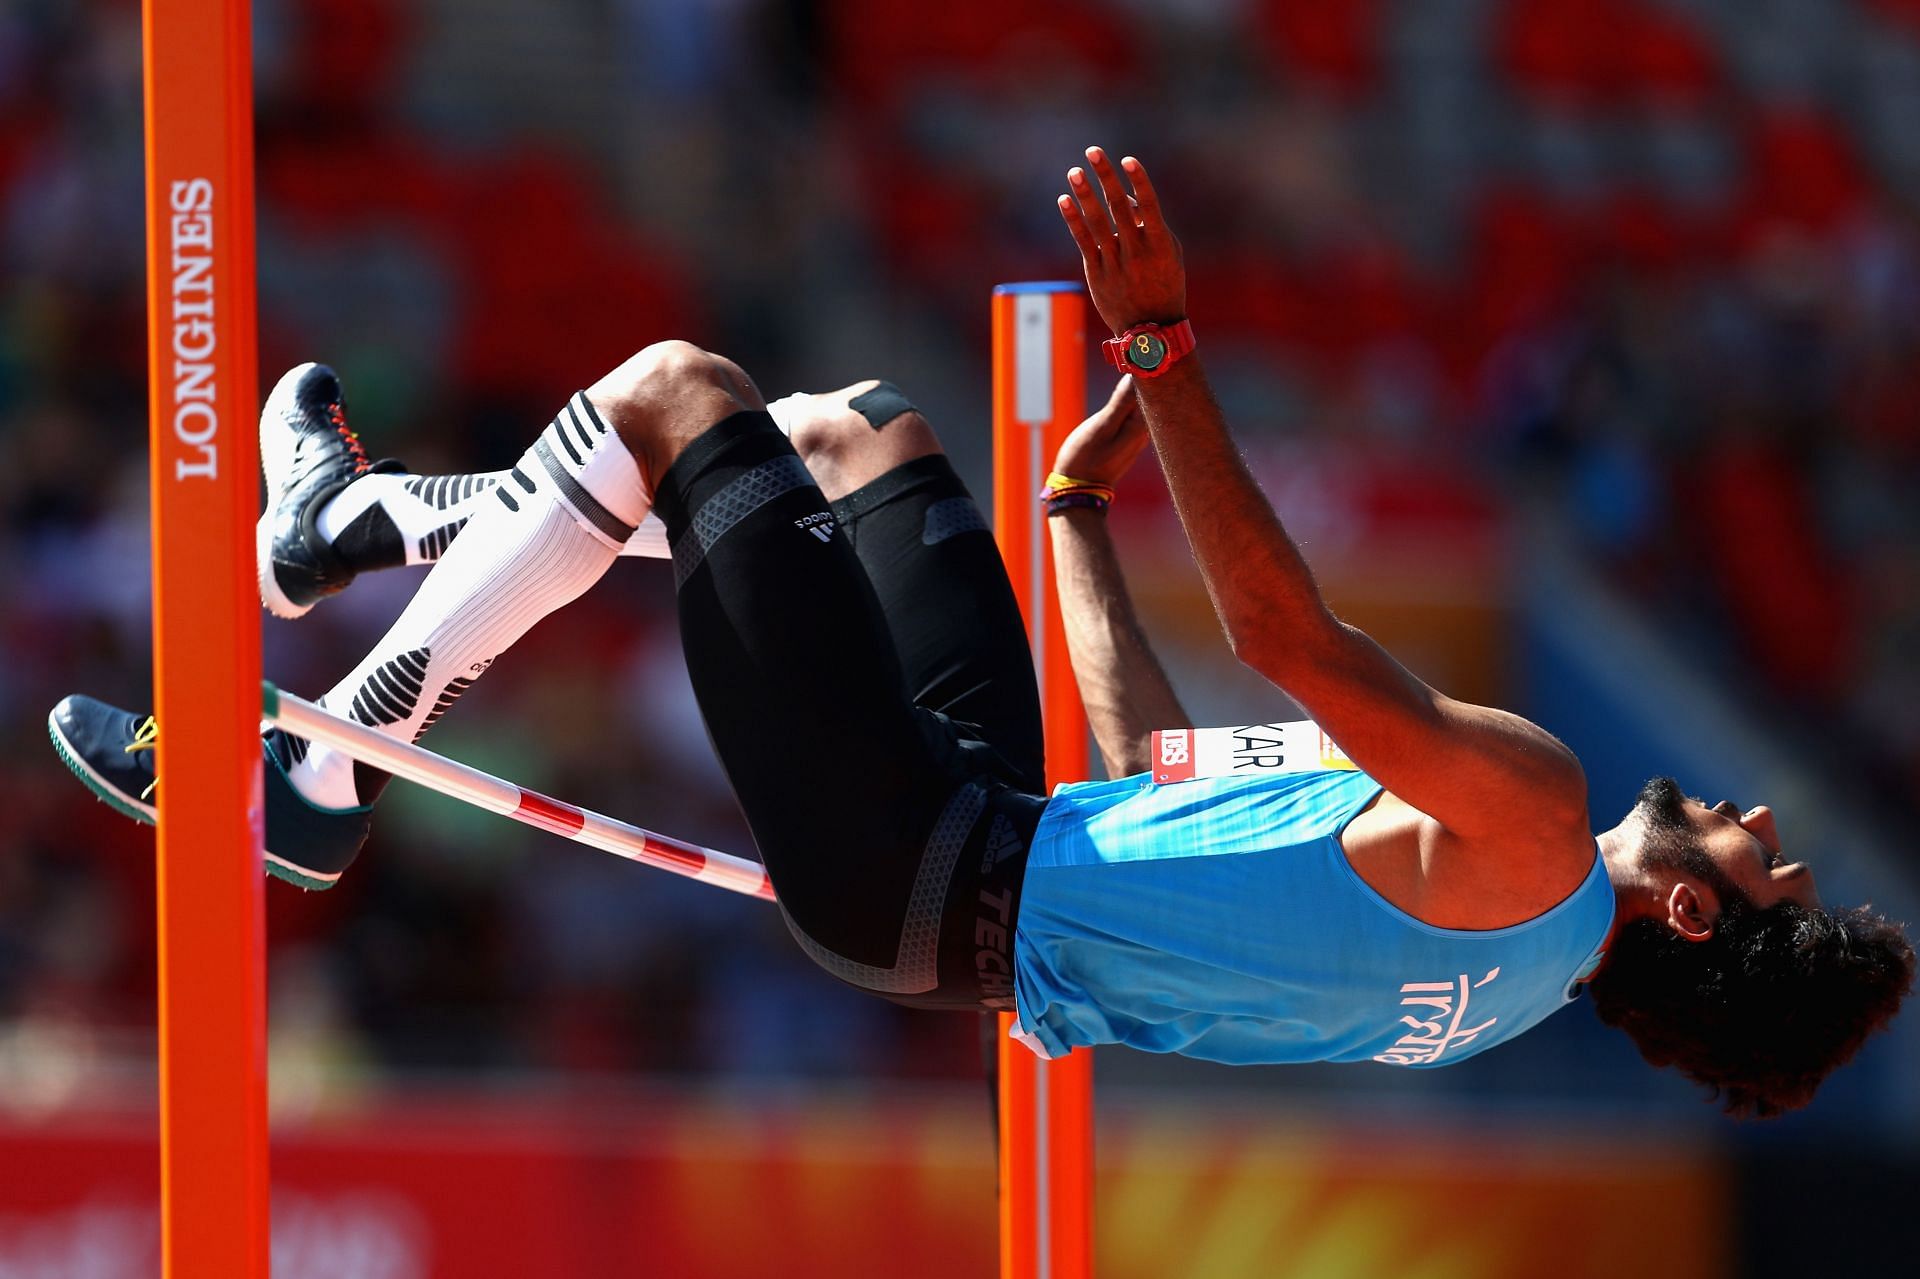 Tejaswin Shankar in action at the 2018 Commonwealth Games (Image courtesy: Getty Images)